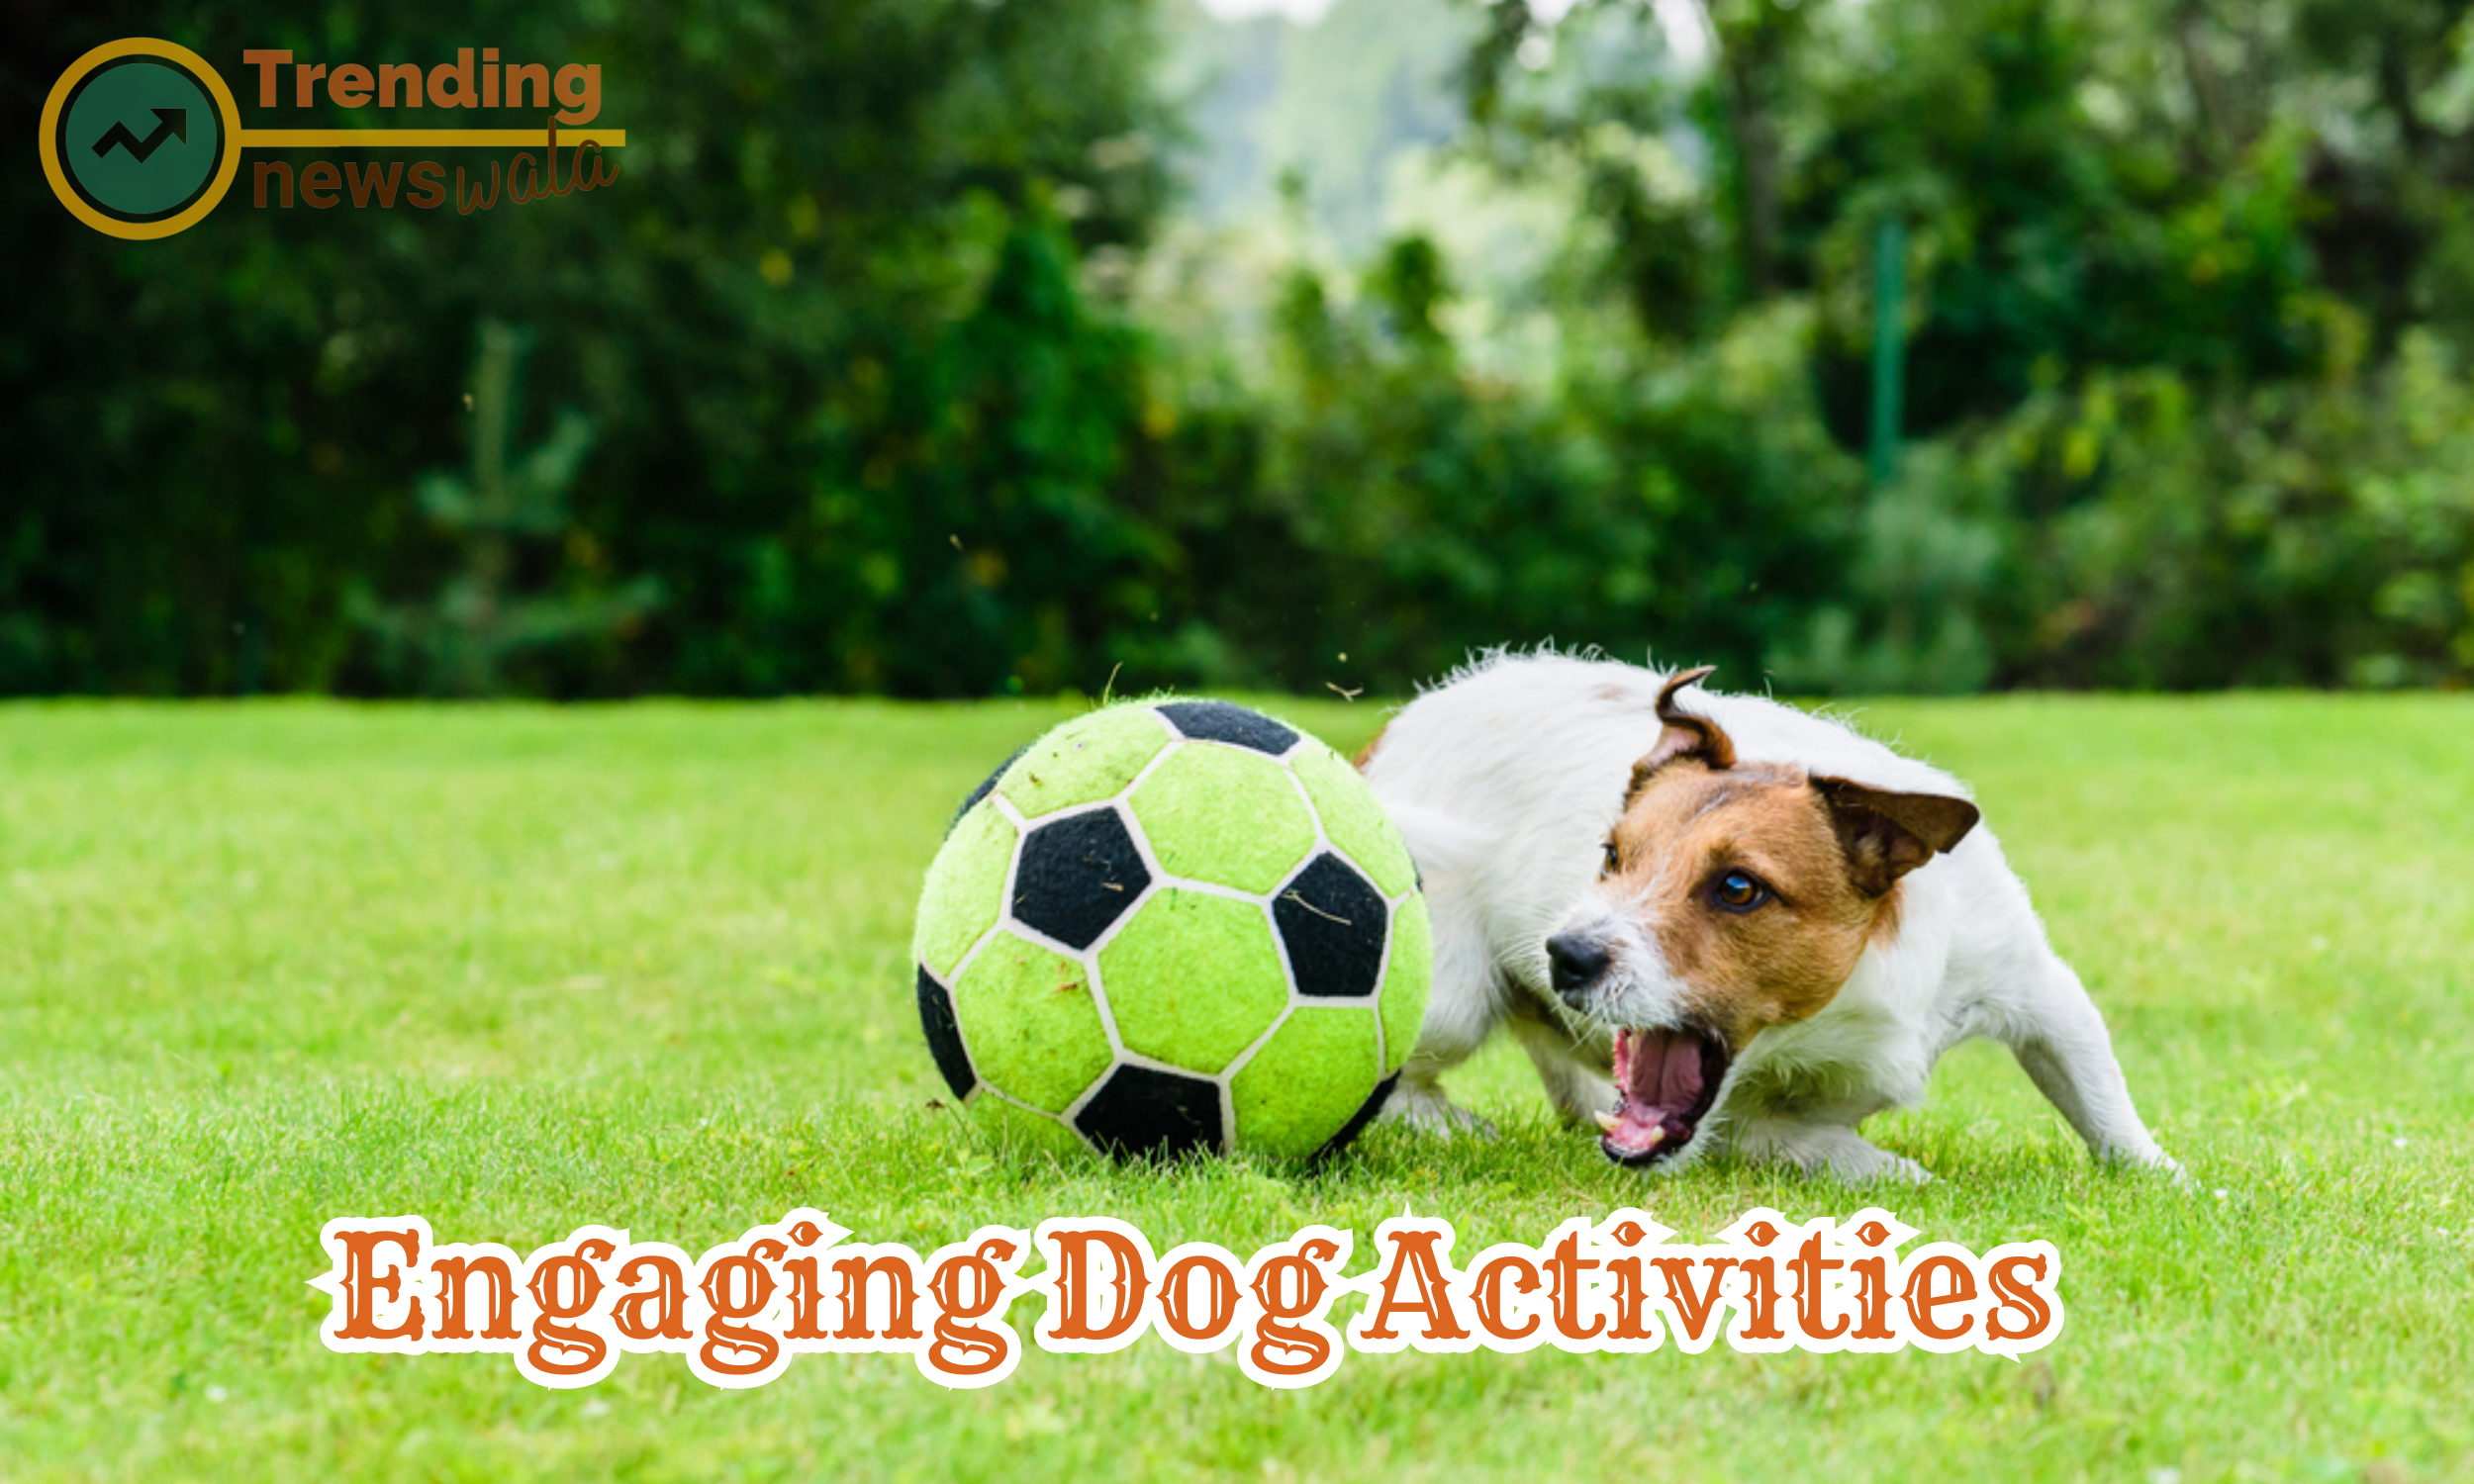 Engaging dog activities encompass a wide range of interactive and stimulating